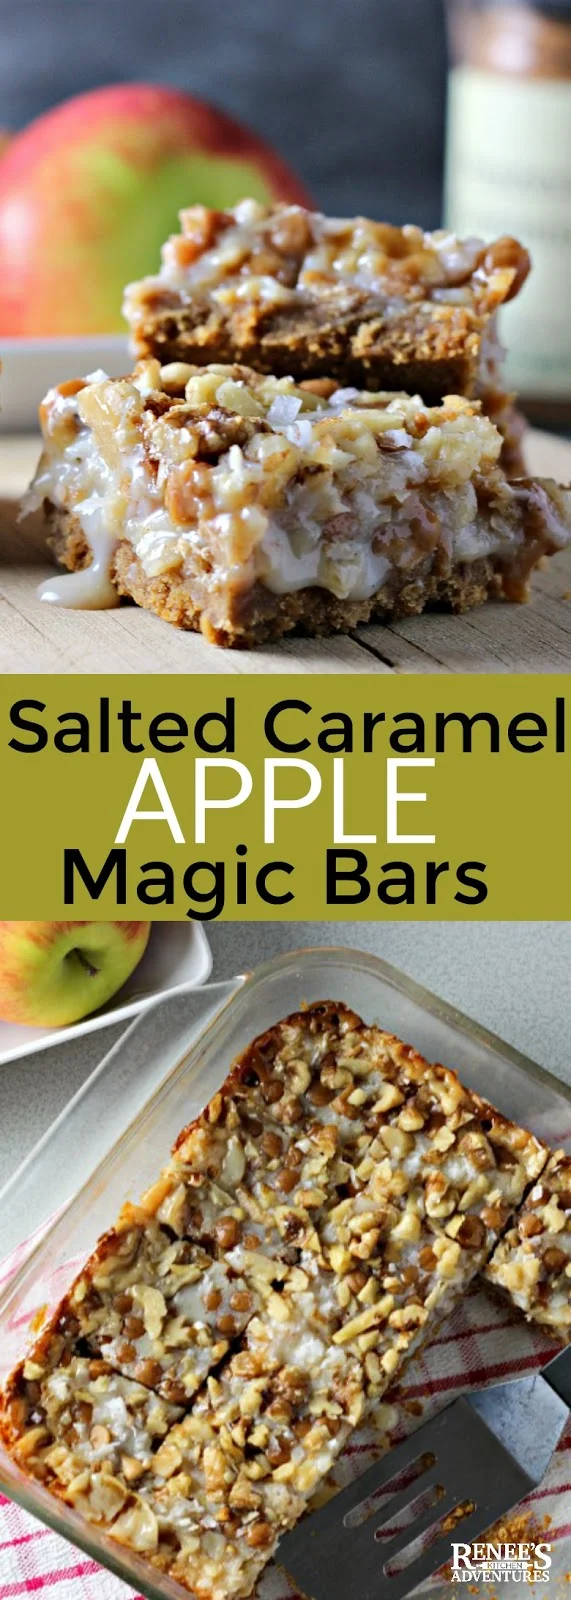 Salted Caramel Apple Magic Cookie Bars | Renee's Kitchen Adventures - an easy dessert recipe that takes the classic Magic Cookie Bar Recipe and transforms it into a tasty Fall flavored one with apples, caramel, and cinnamon. #apple #caramel #cookie #cookiebar #recipe #barcookies #fall